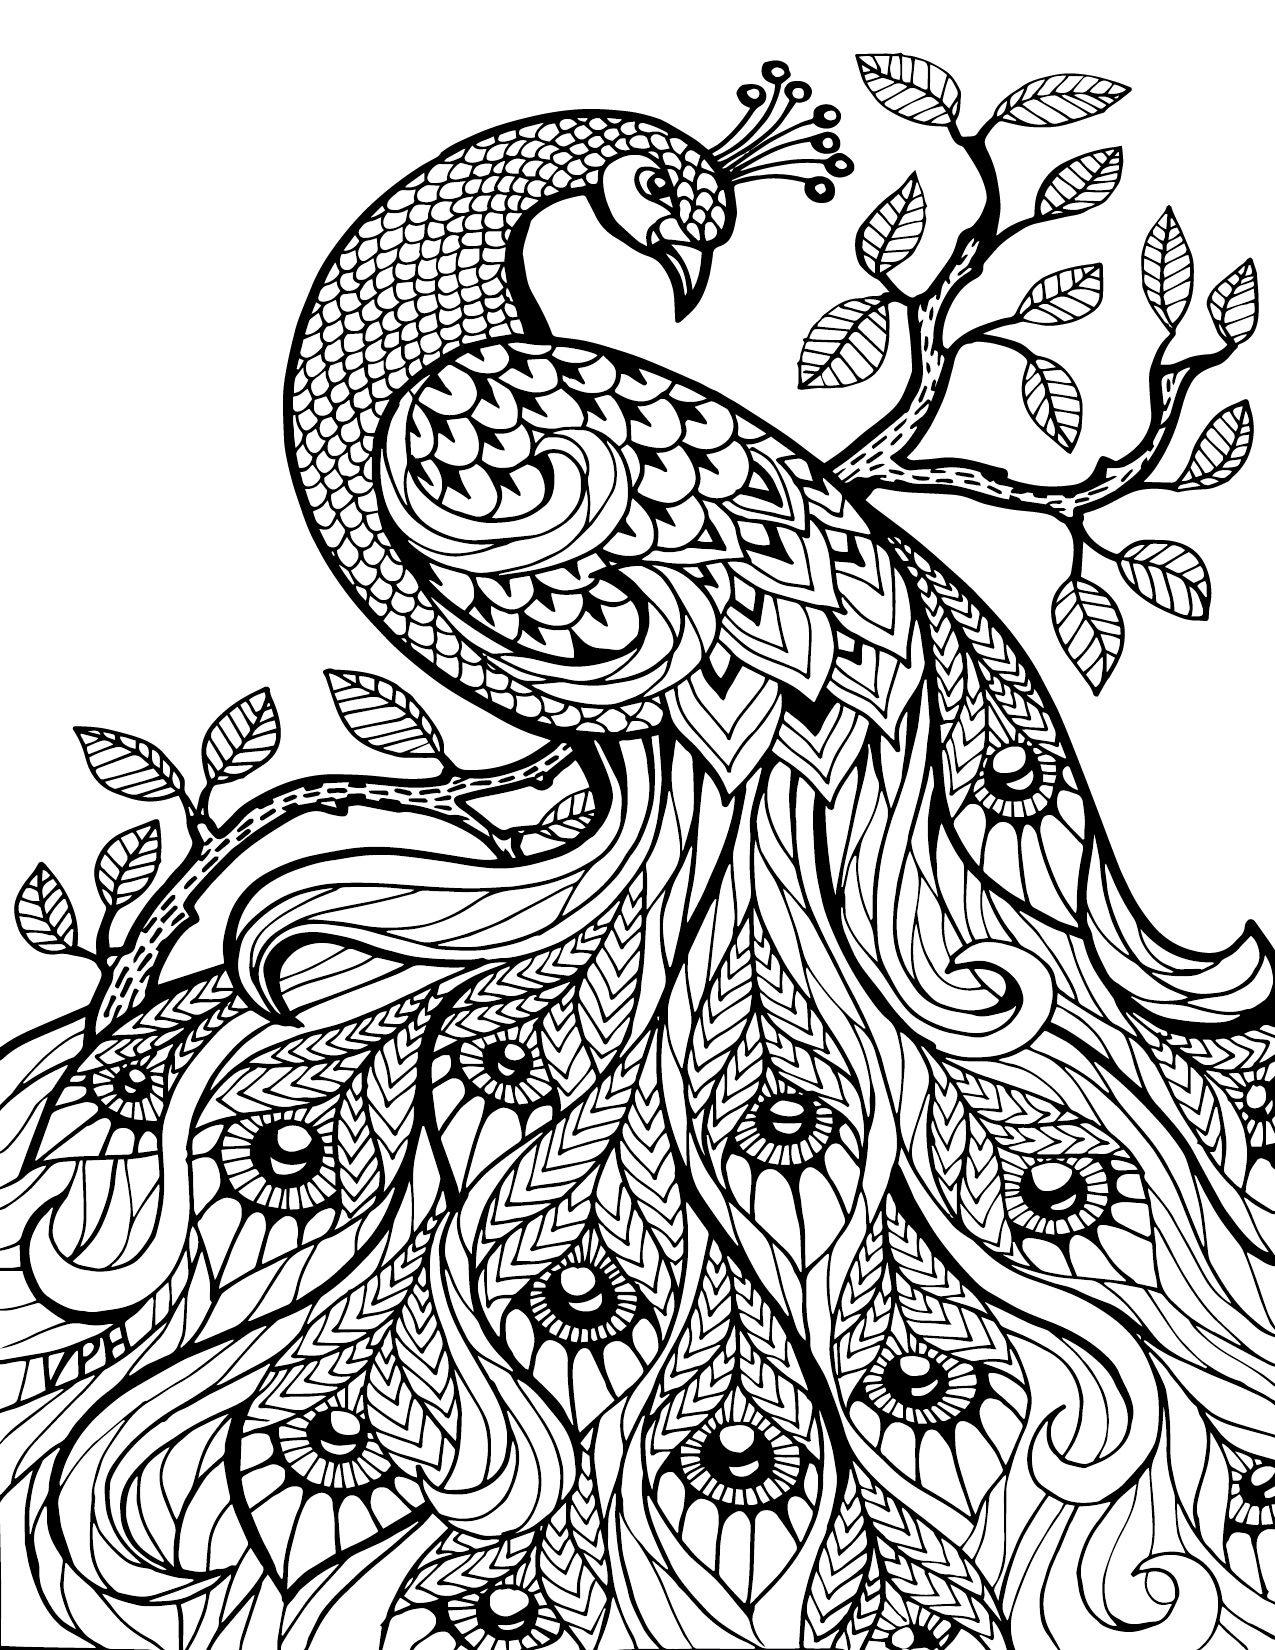 Free Printable Coloring Pages For Adults Only Image 36 Art - Free Printable Coloring Books For Adults